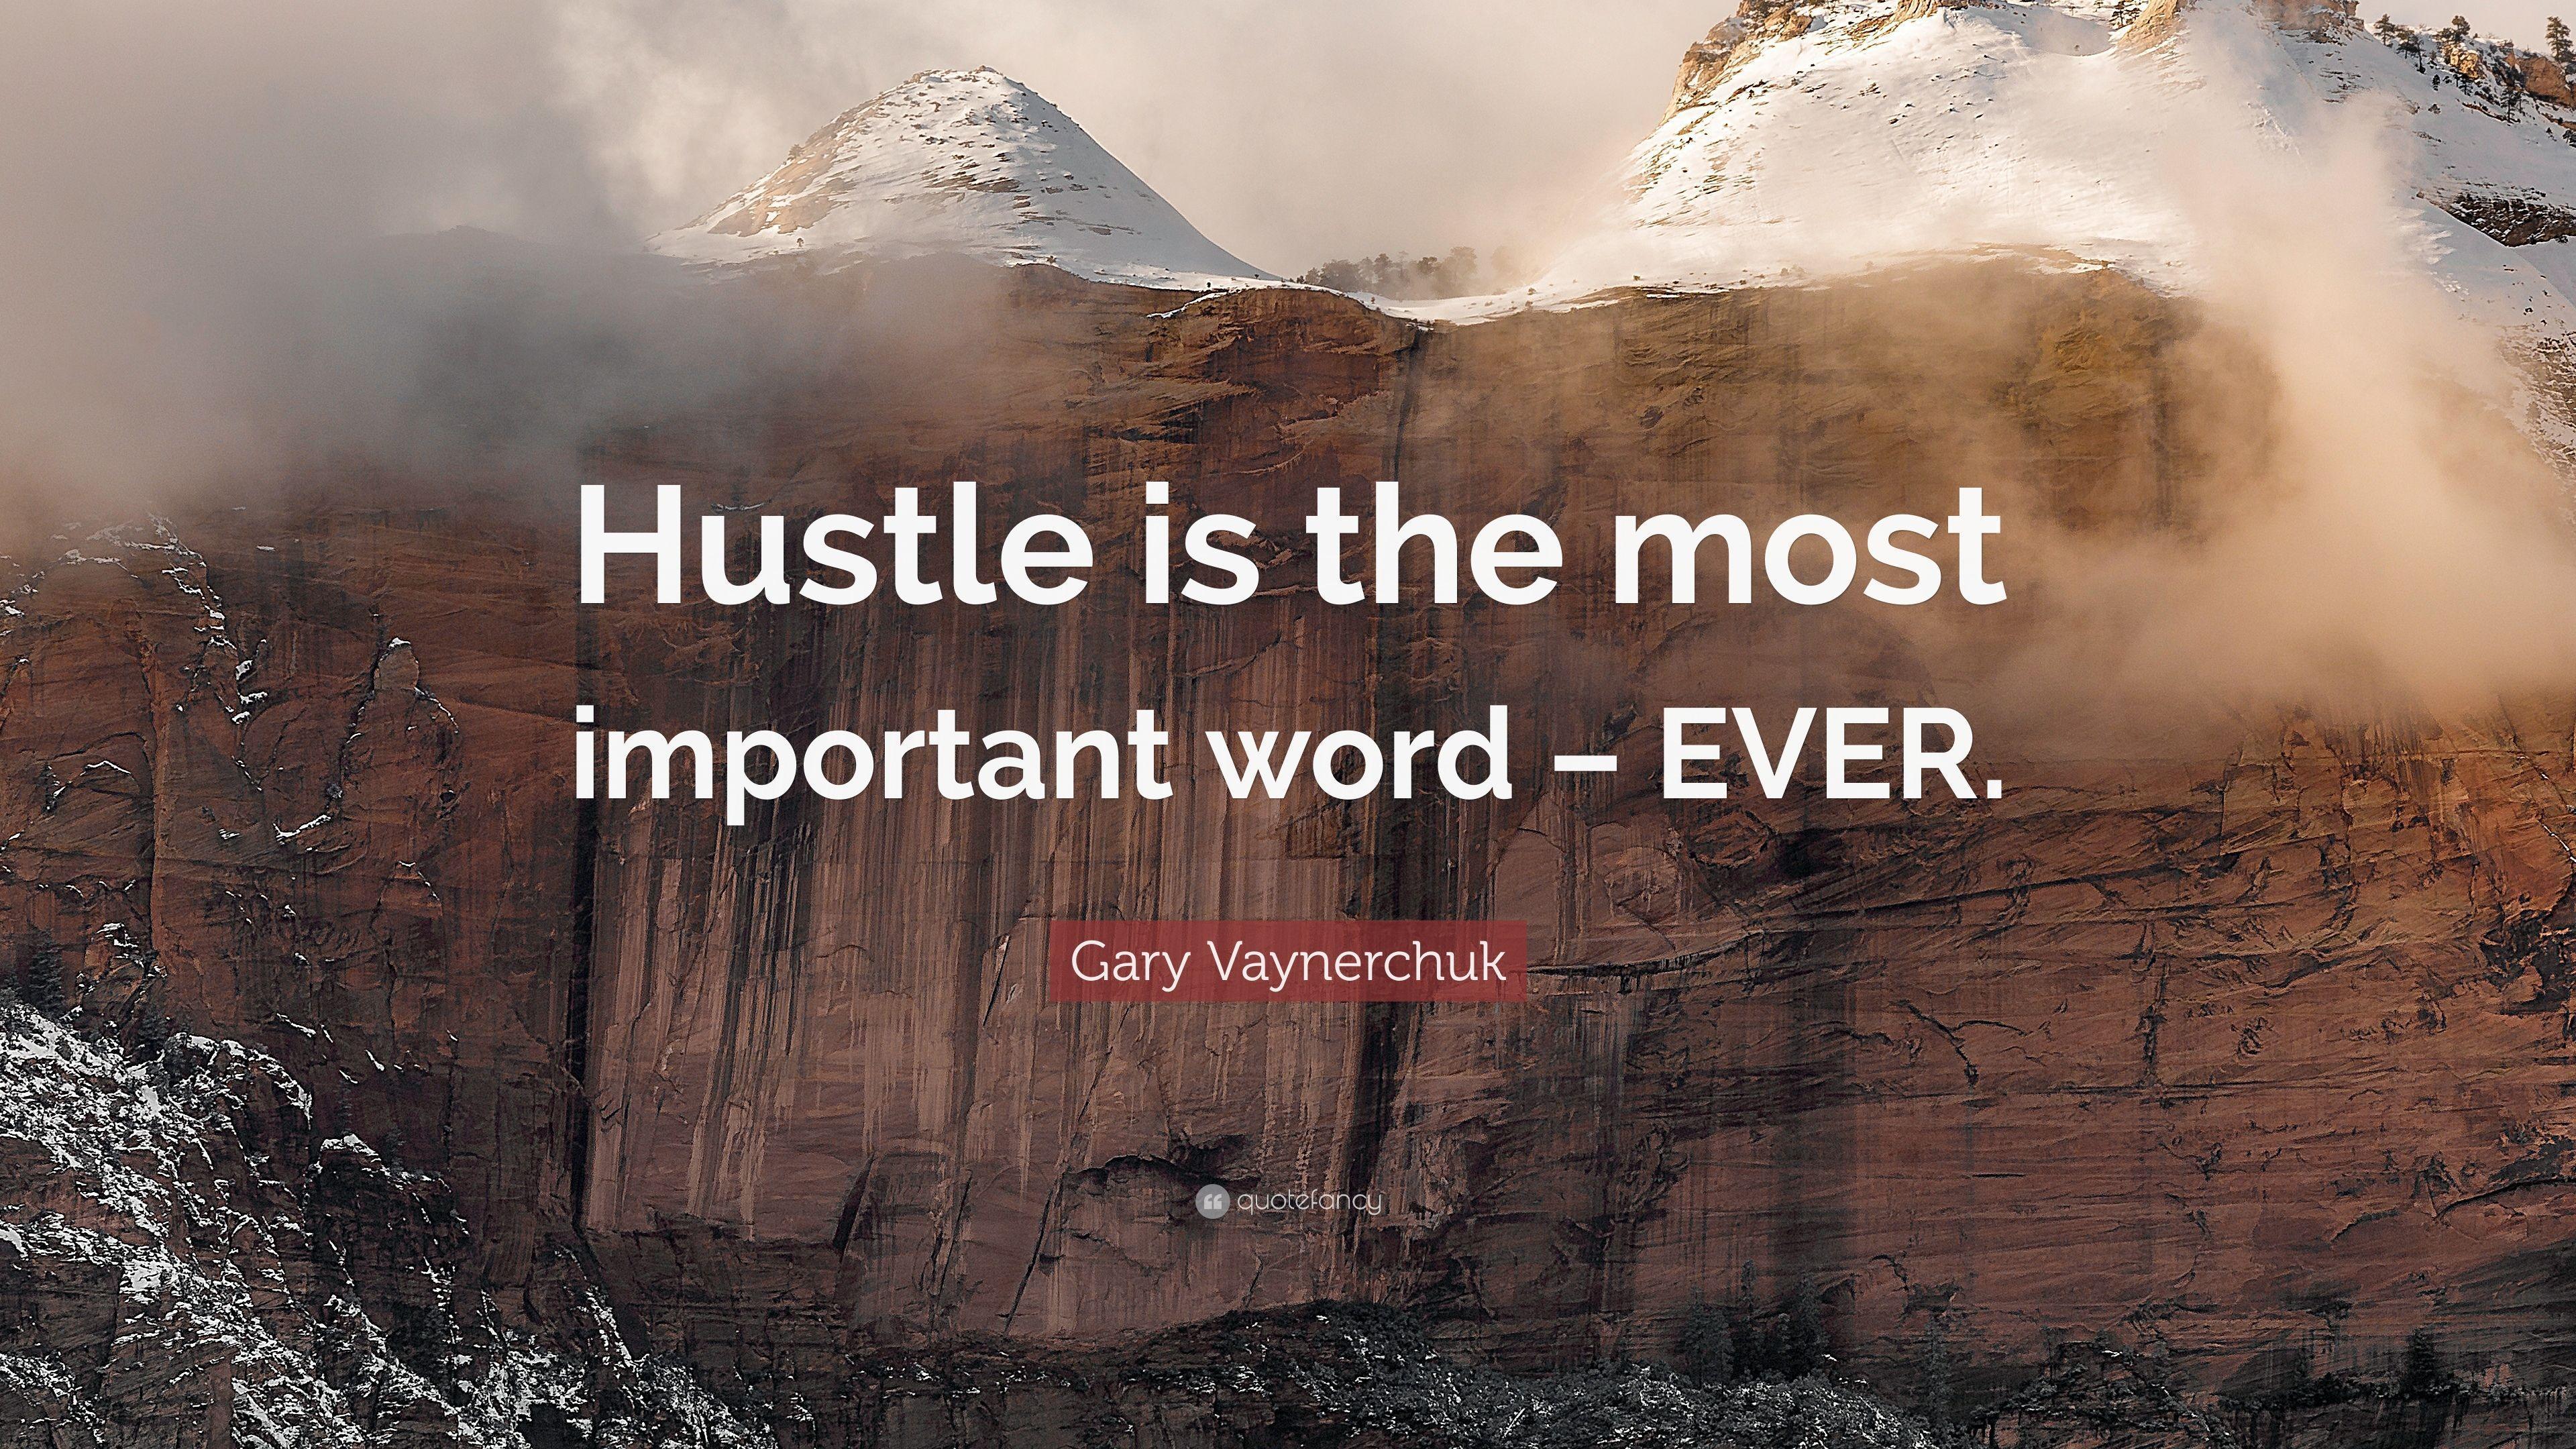 Gary Vaynerchuk Quote: “Hustle is the most important word